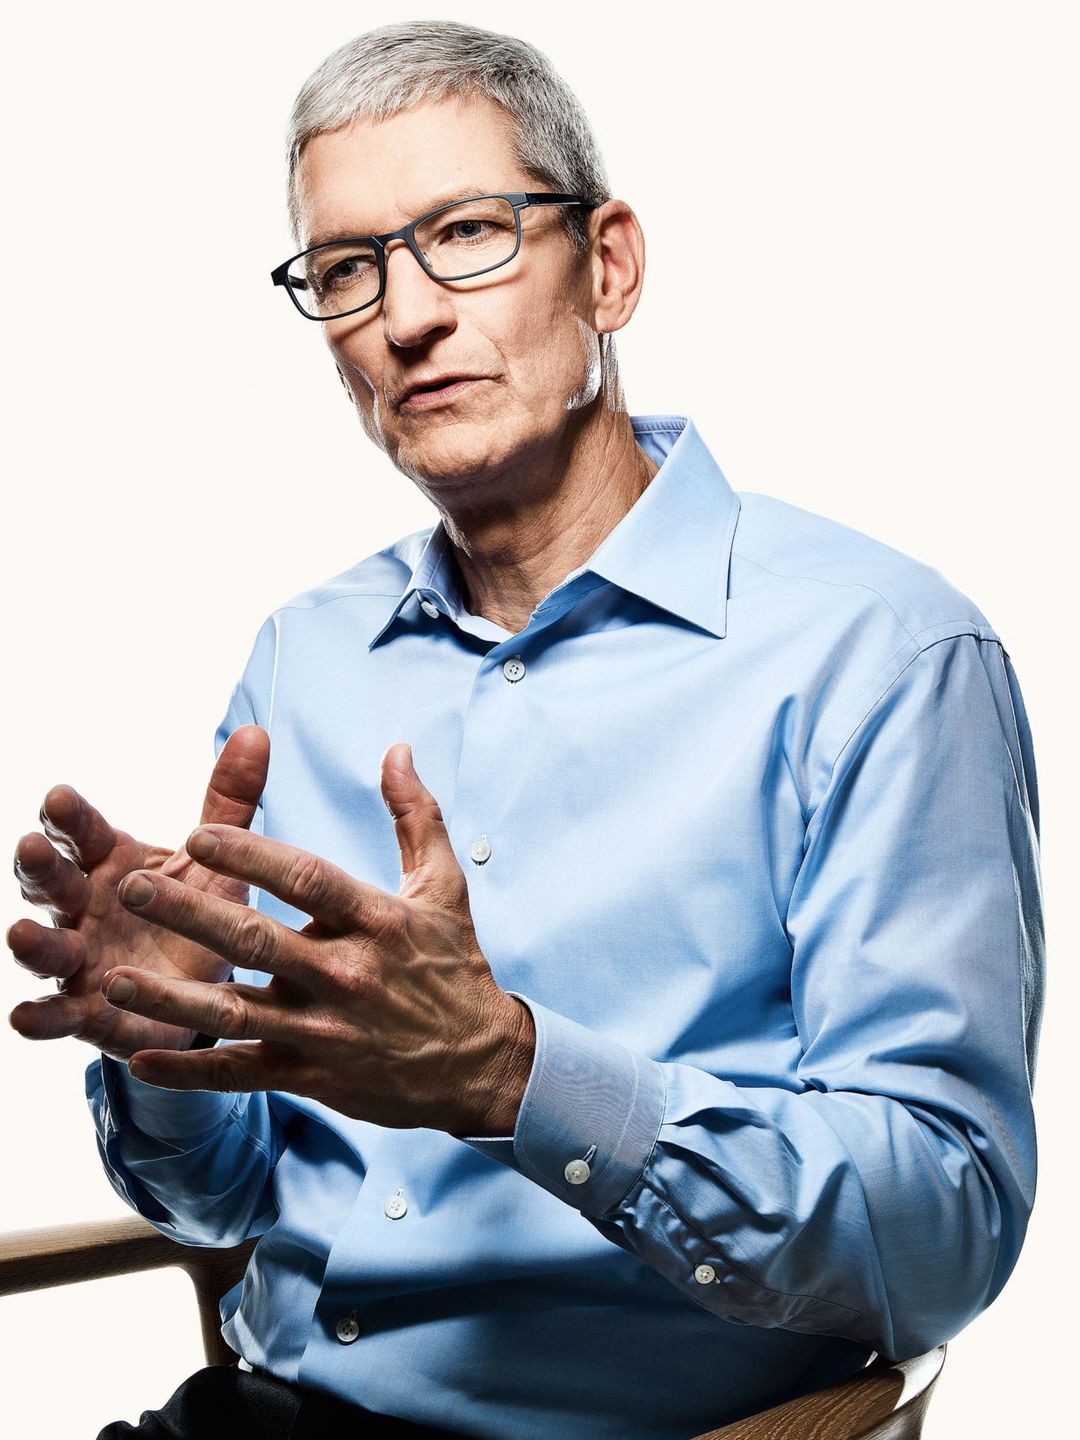 Tim Cook personal traits